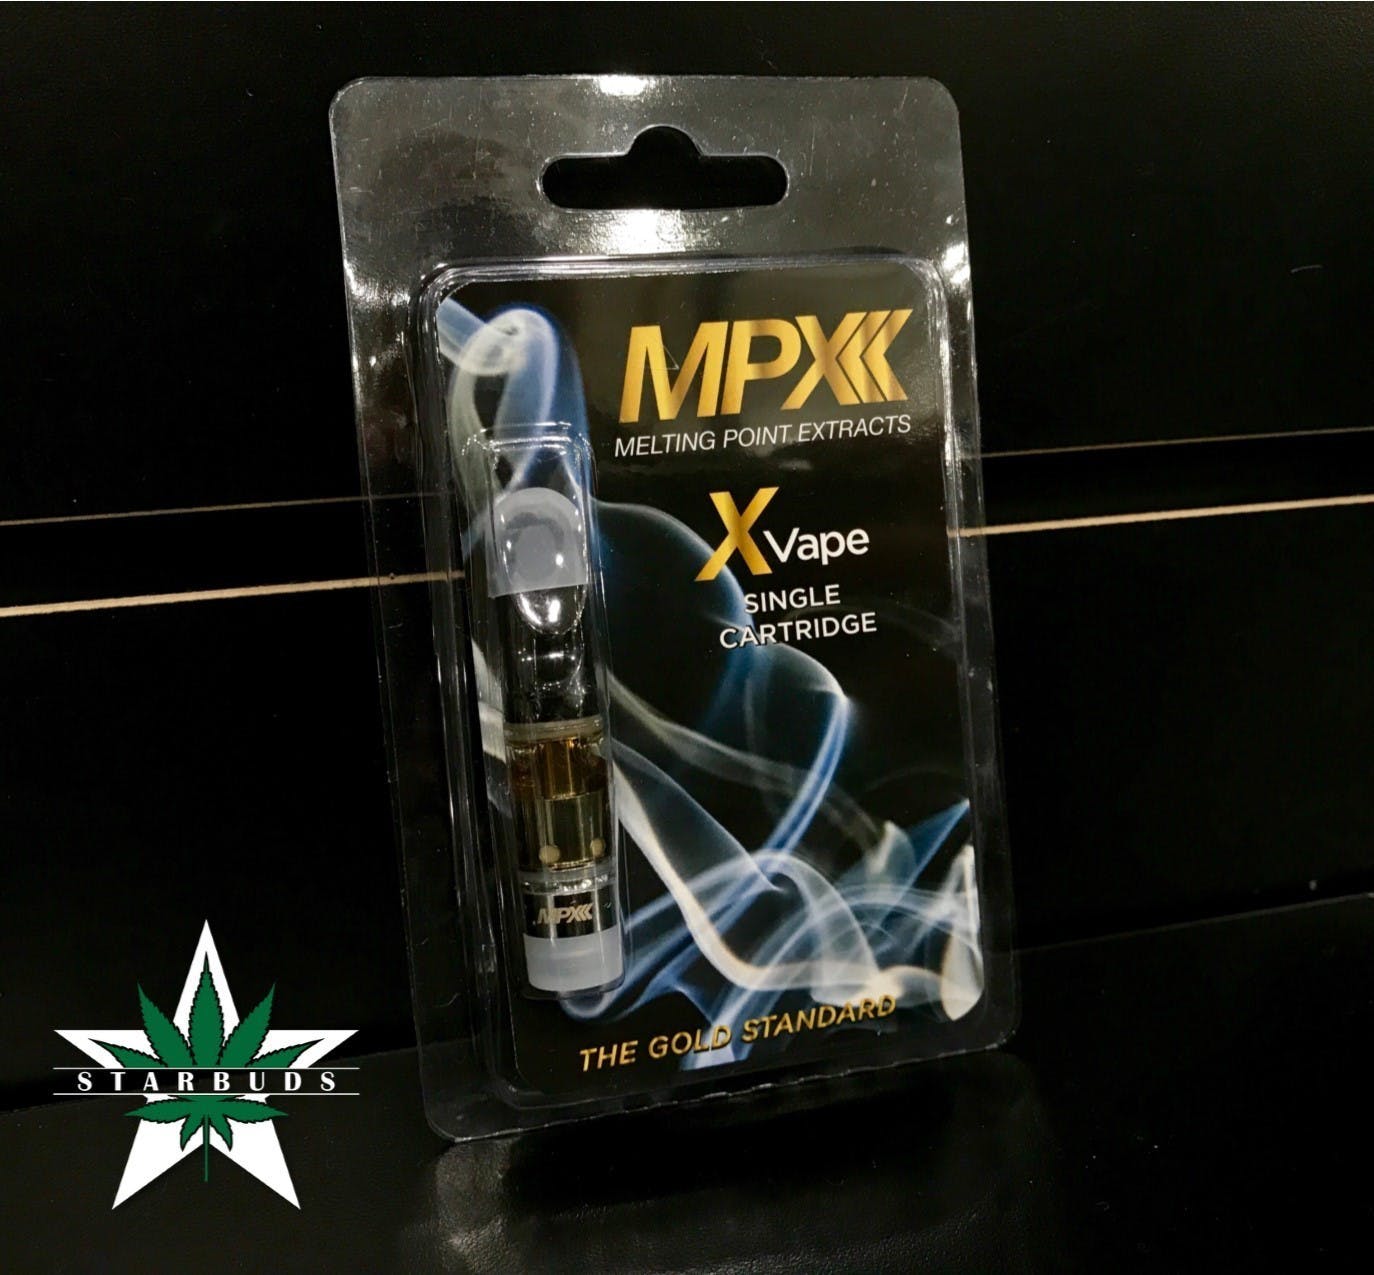 concentrate-og-kush-500mg-vape-cartridge-by-mpx